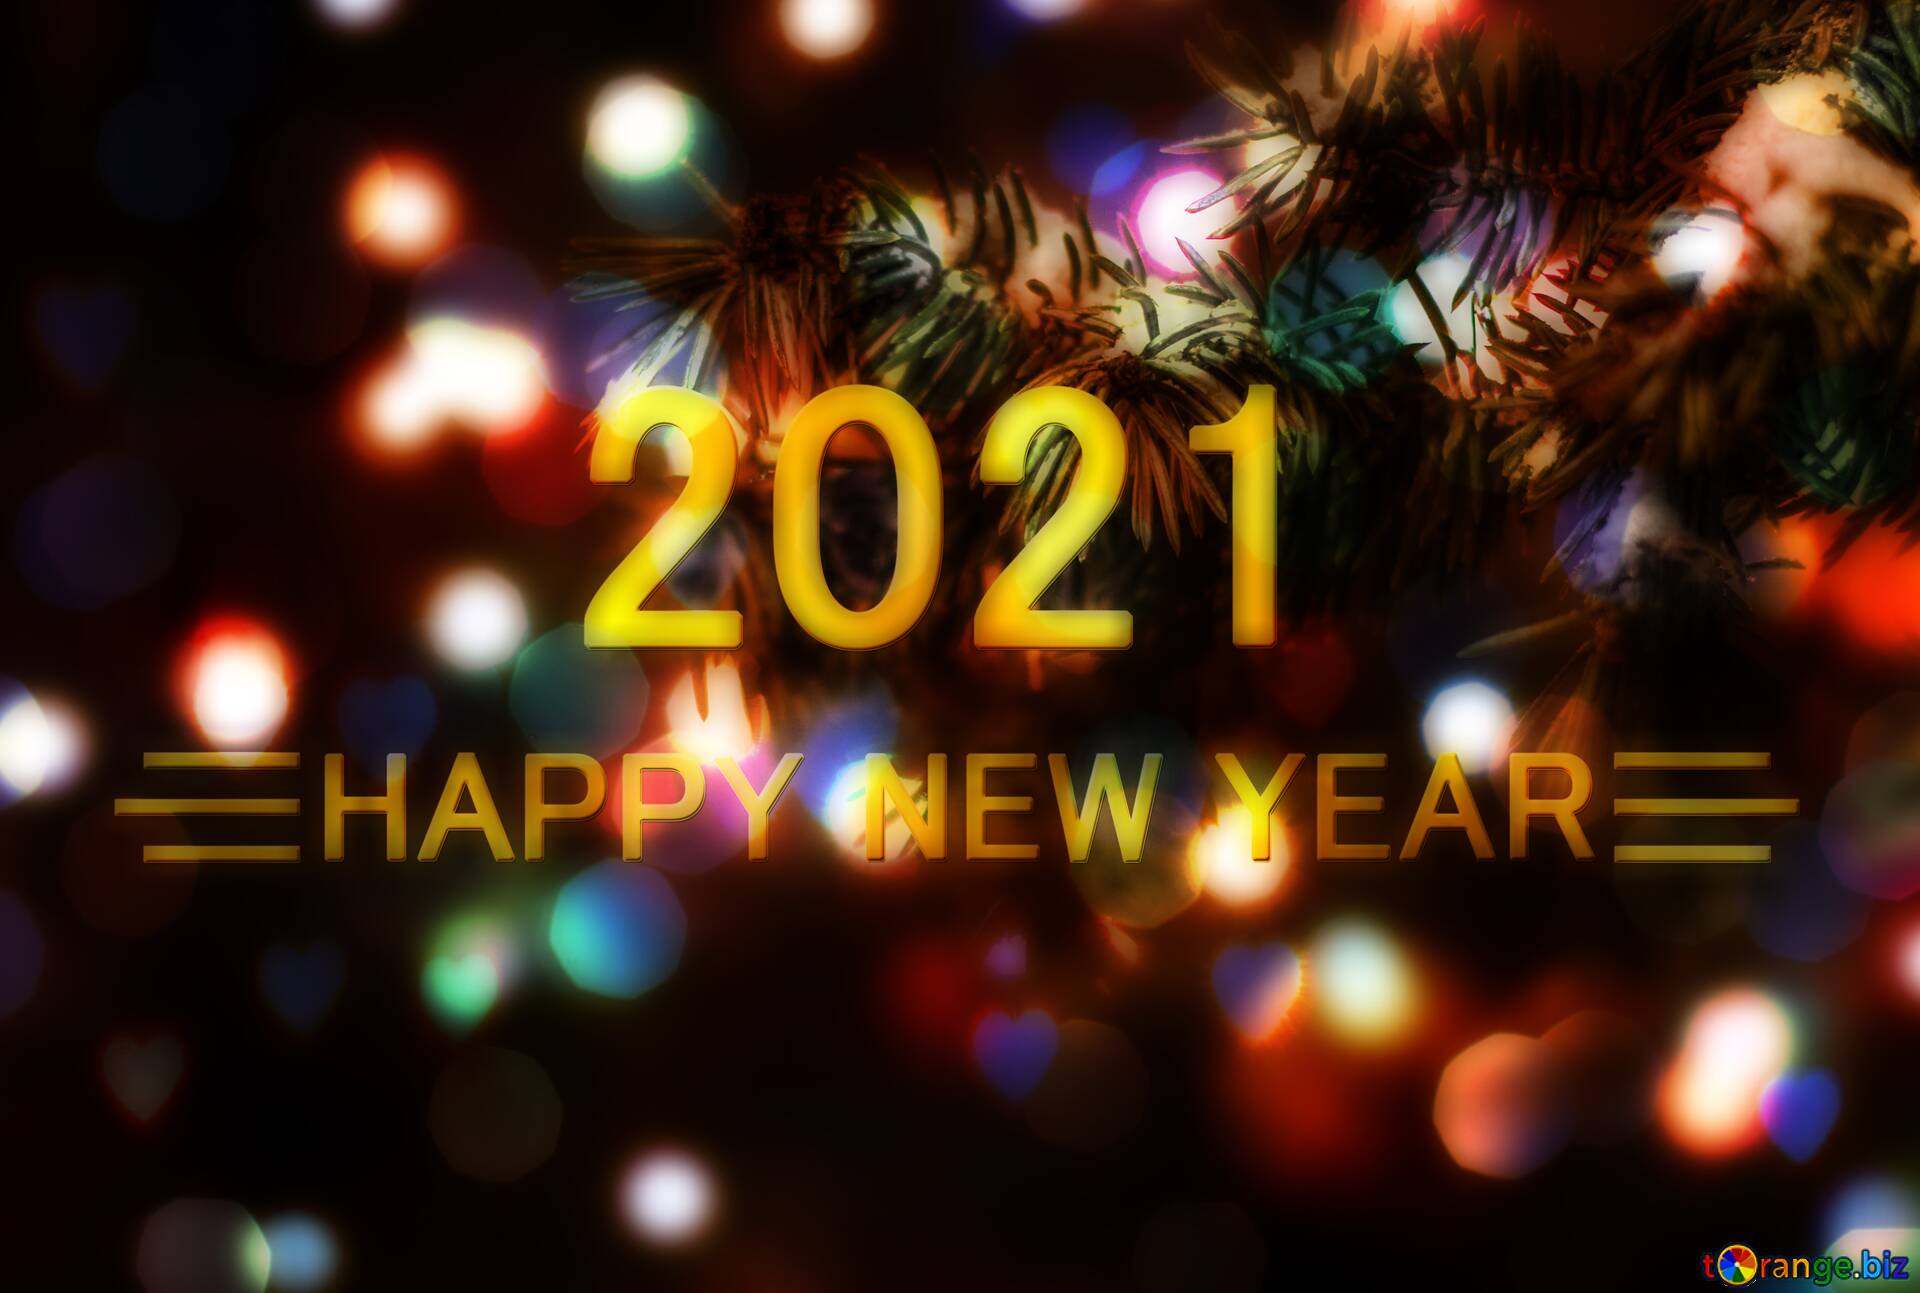 Download free picture Christmas desktop happy new year 2021 on CC